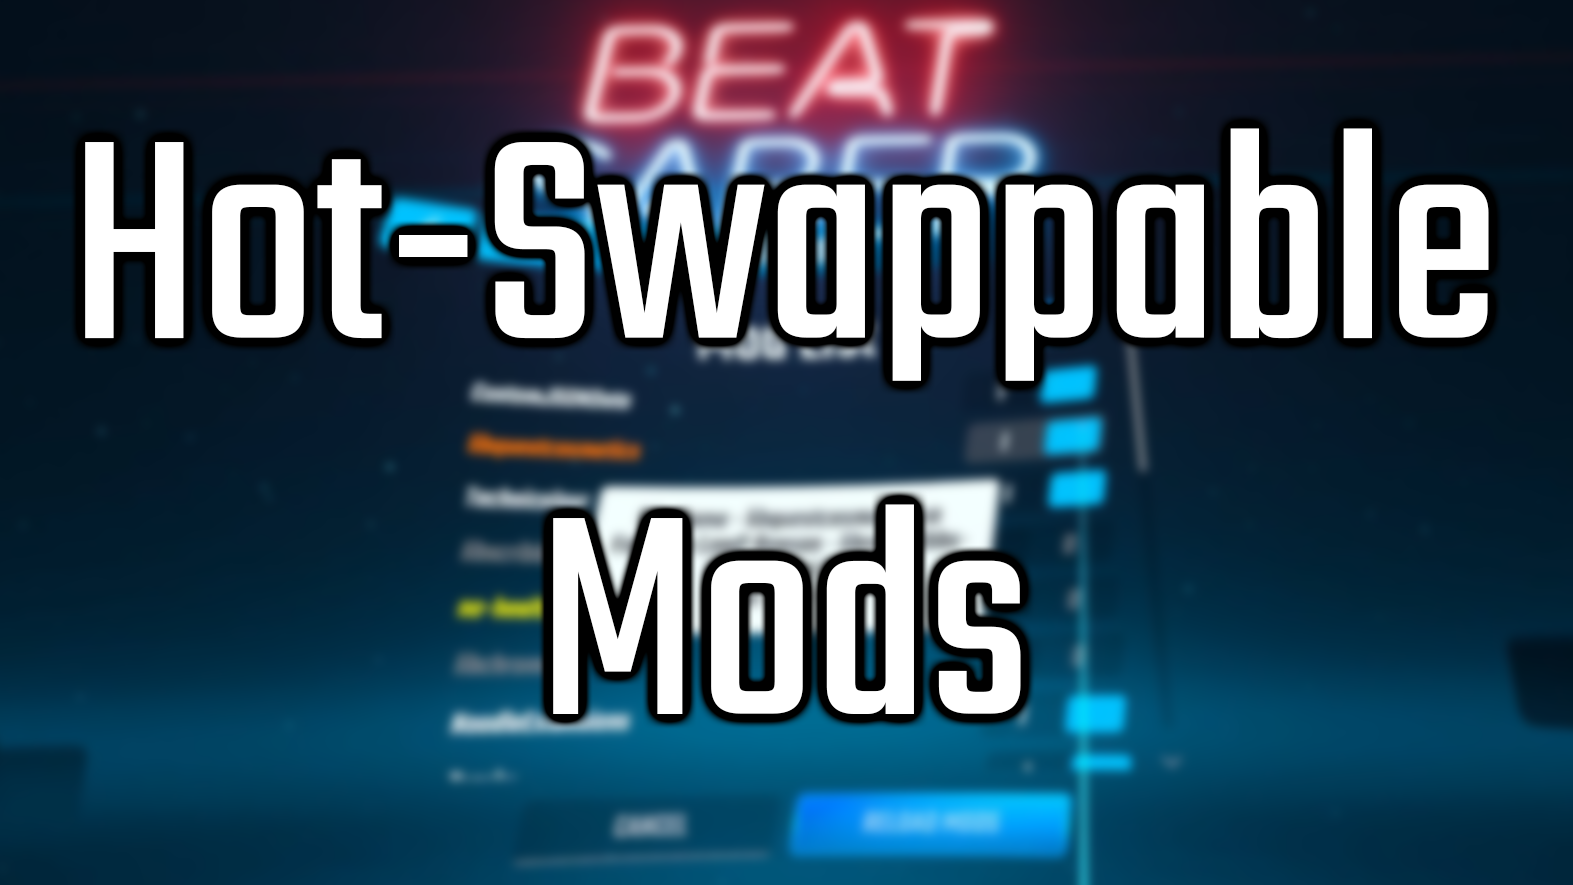 Hot-Swappable Mods